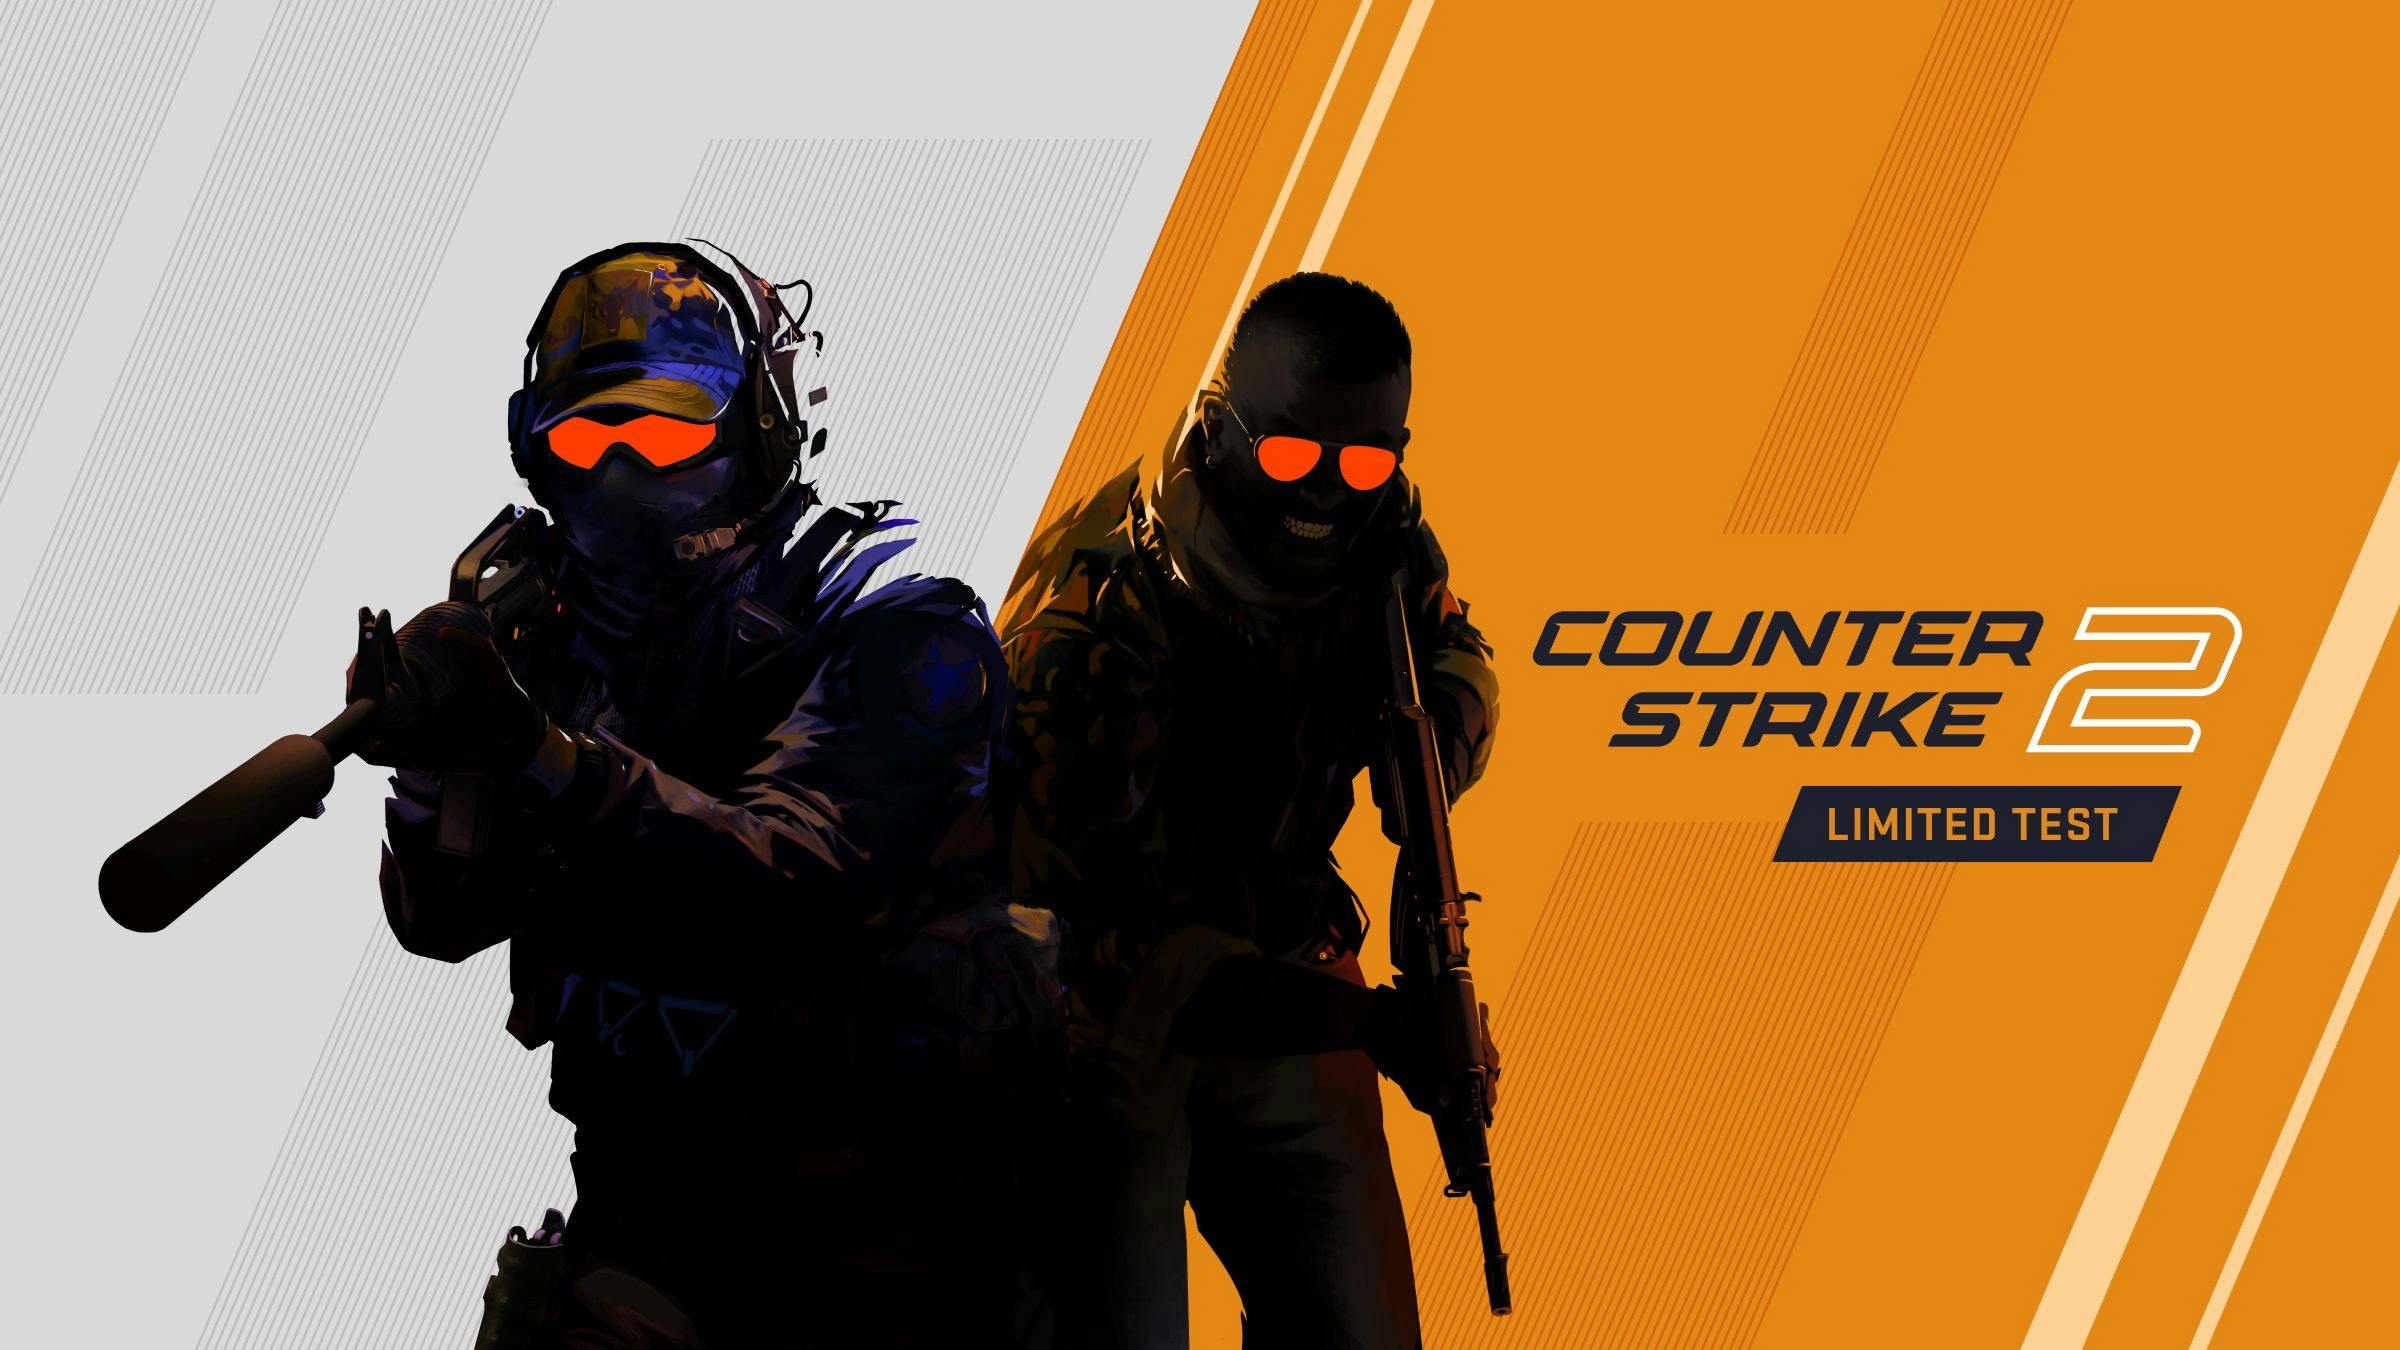 CSGO Is Getting A Major Update and Rework to Counter Strike 2